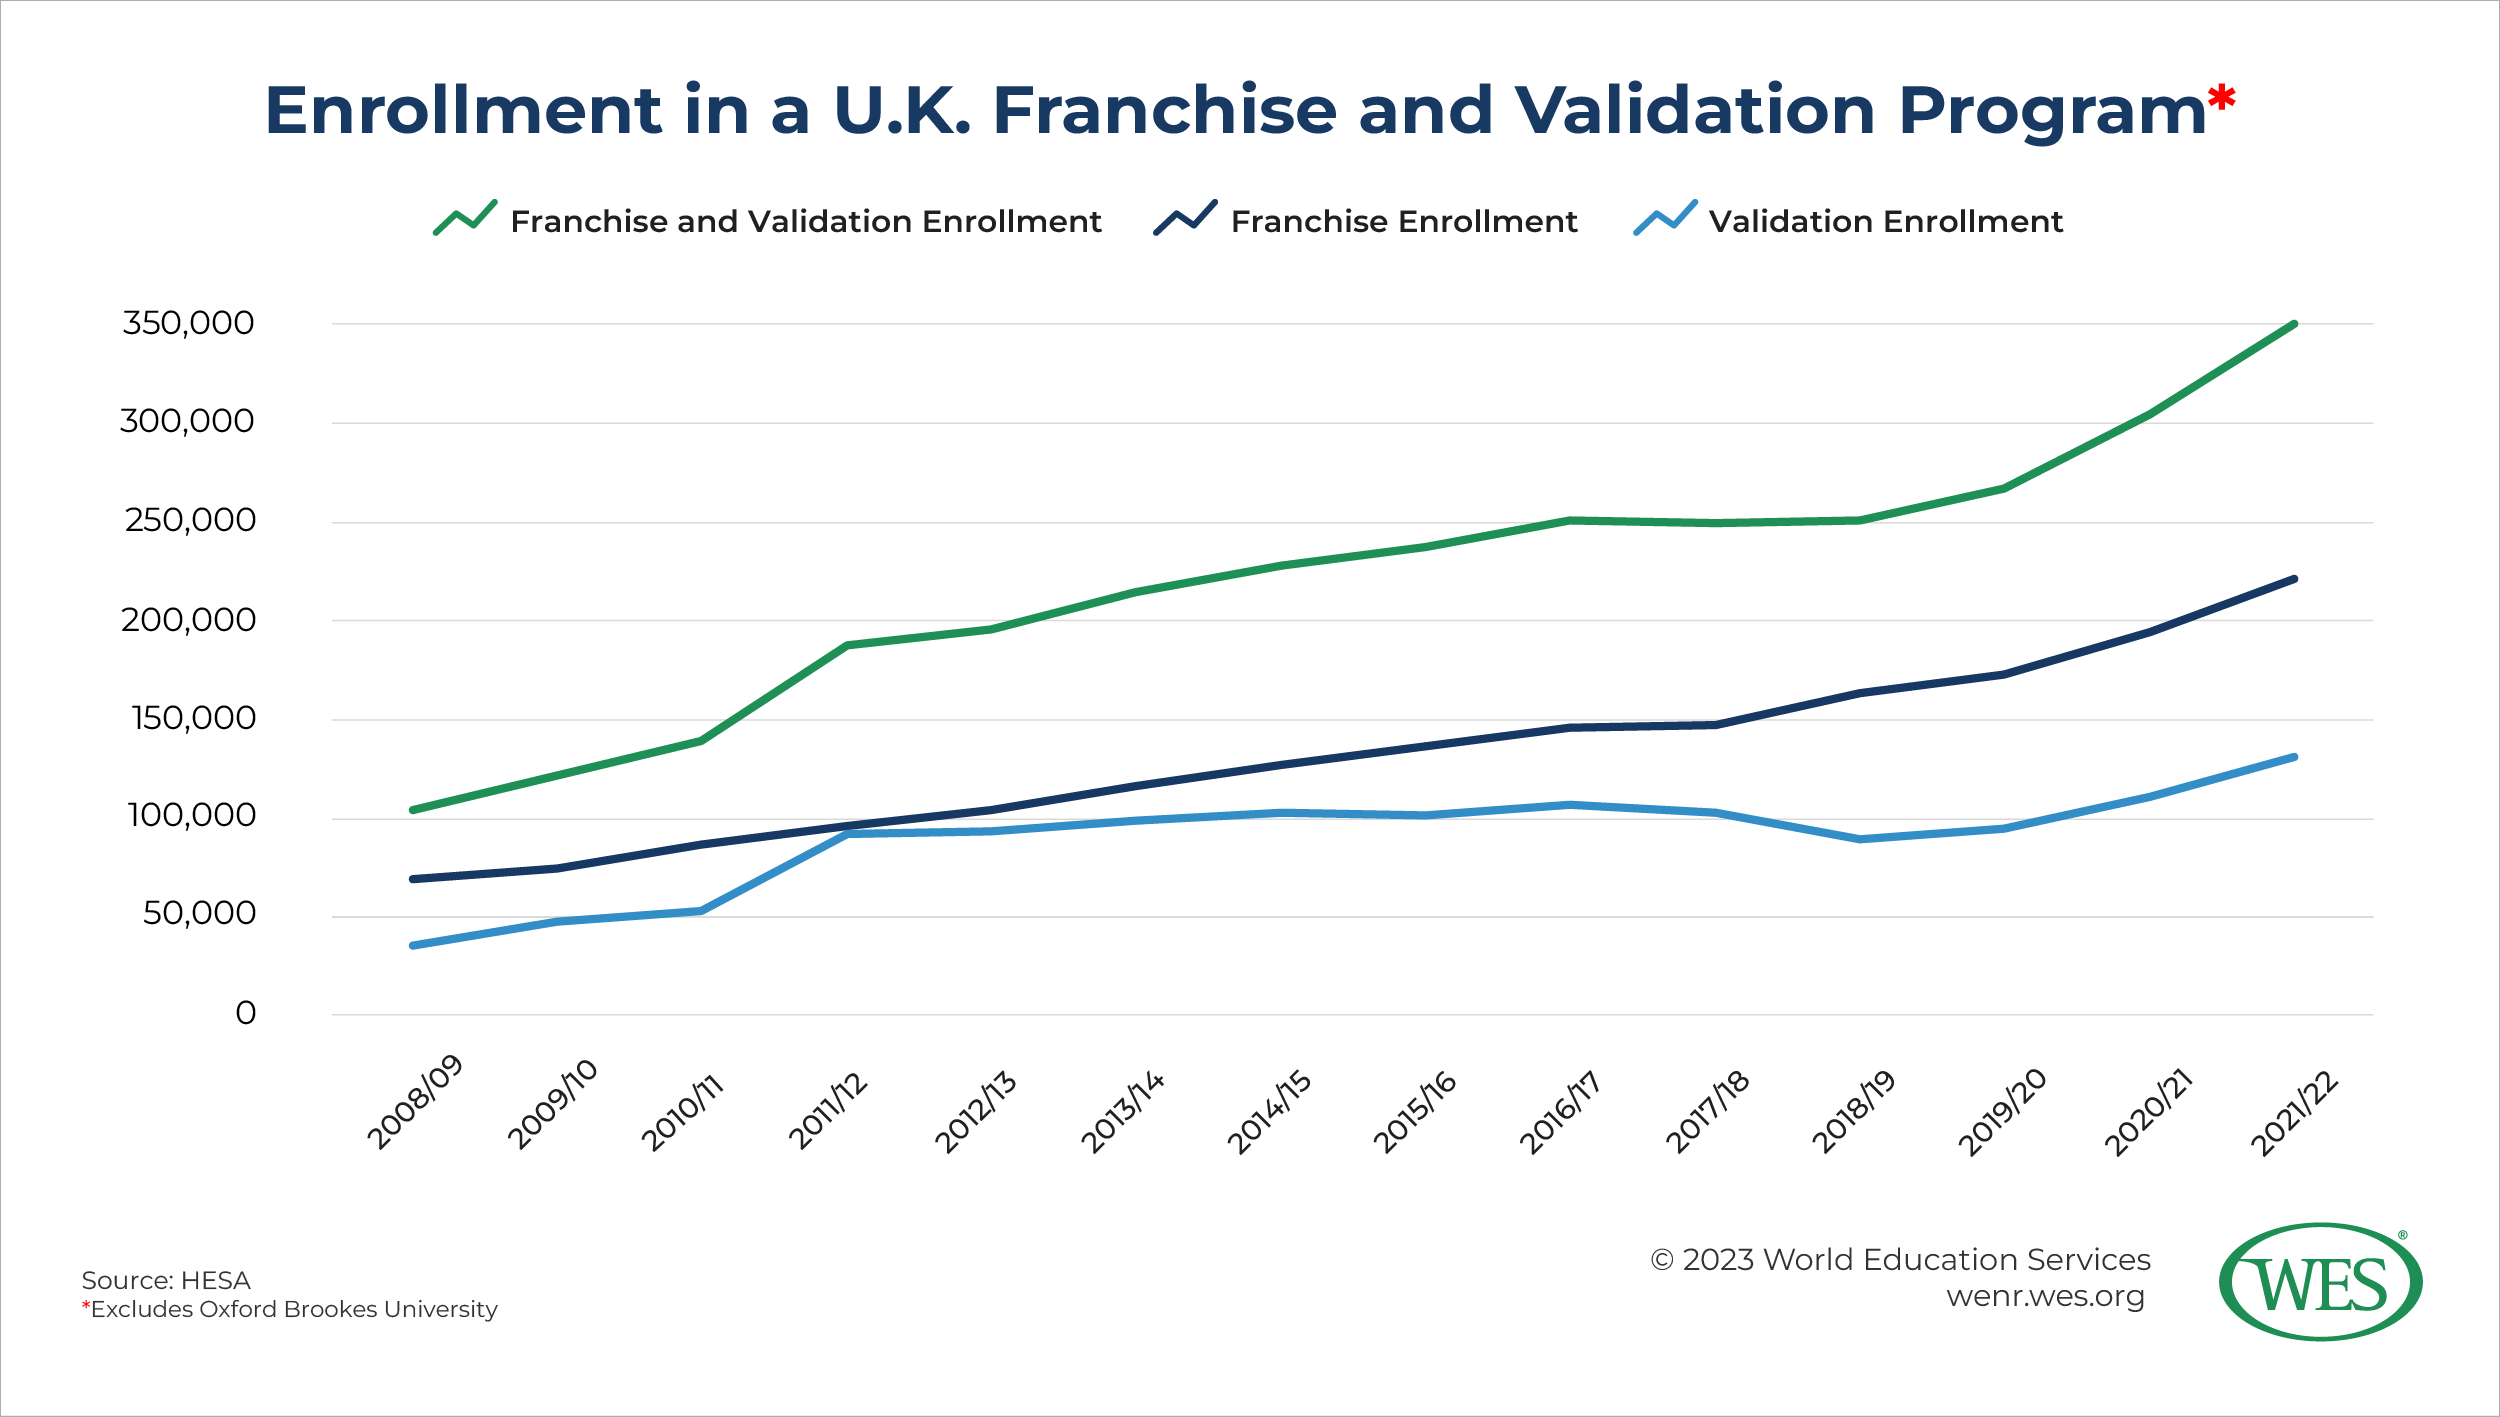 A chart showing annual enrollment in a U.K. franchise and validation program between 2008/09 and 2021/22.